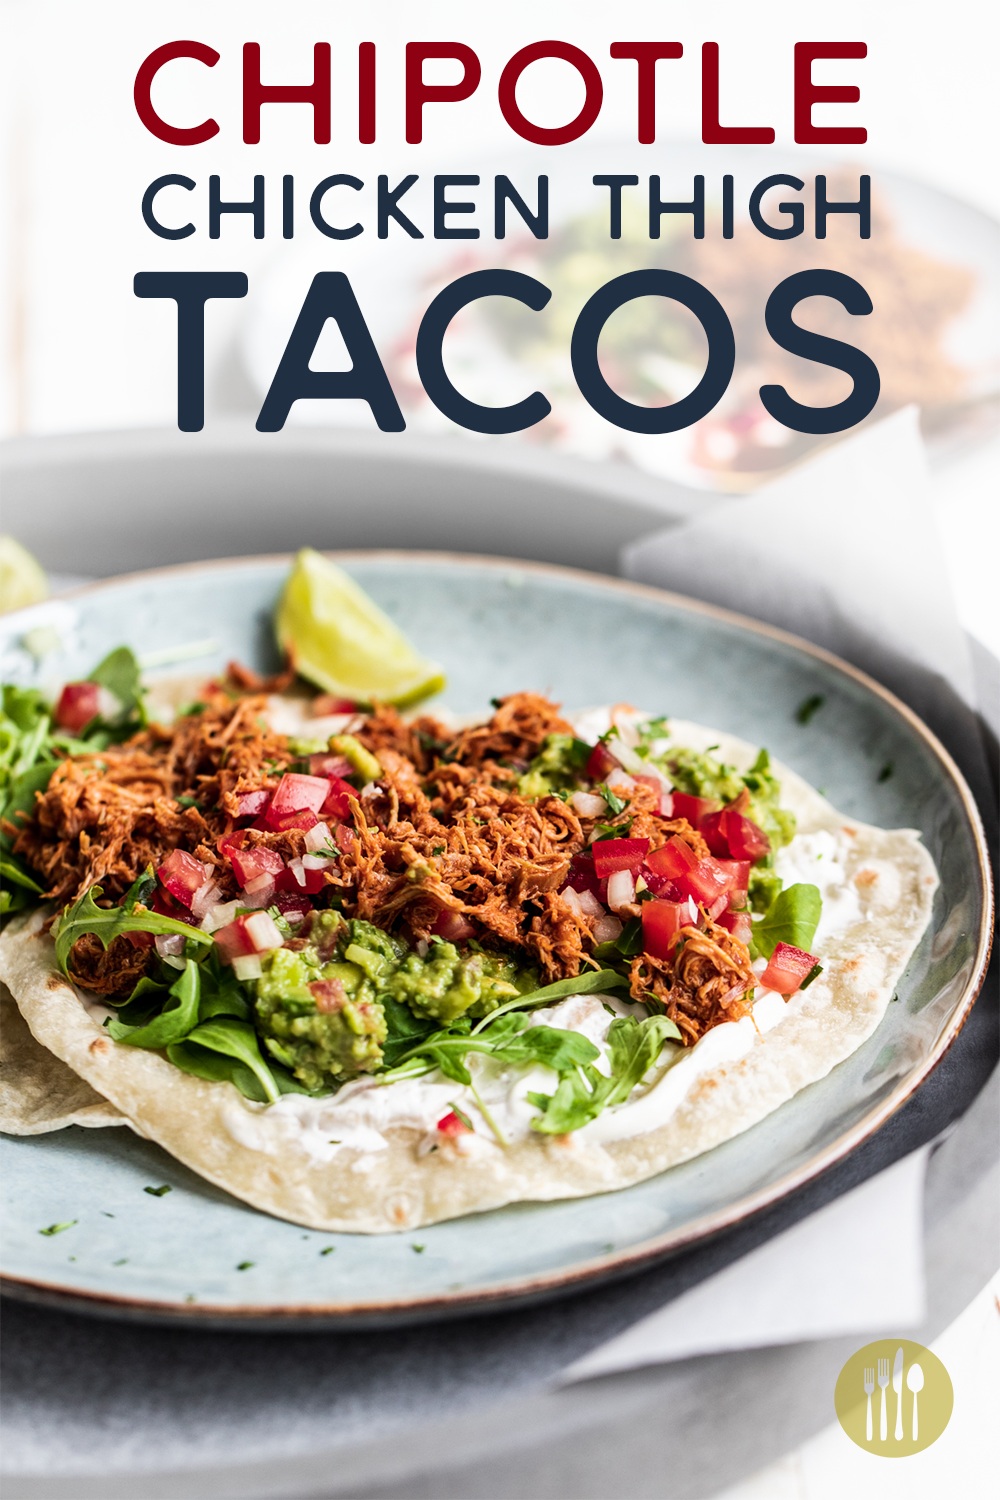 Slow cooked chipotle chicken tacos on a blue plate and white background with text